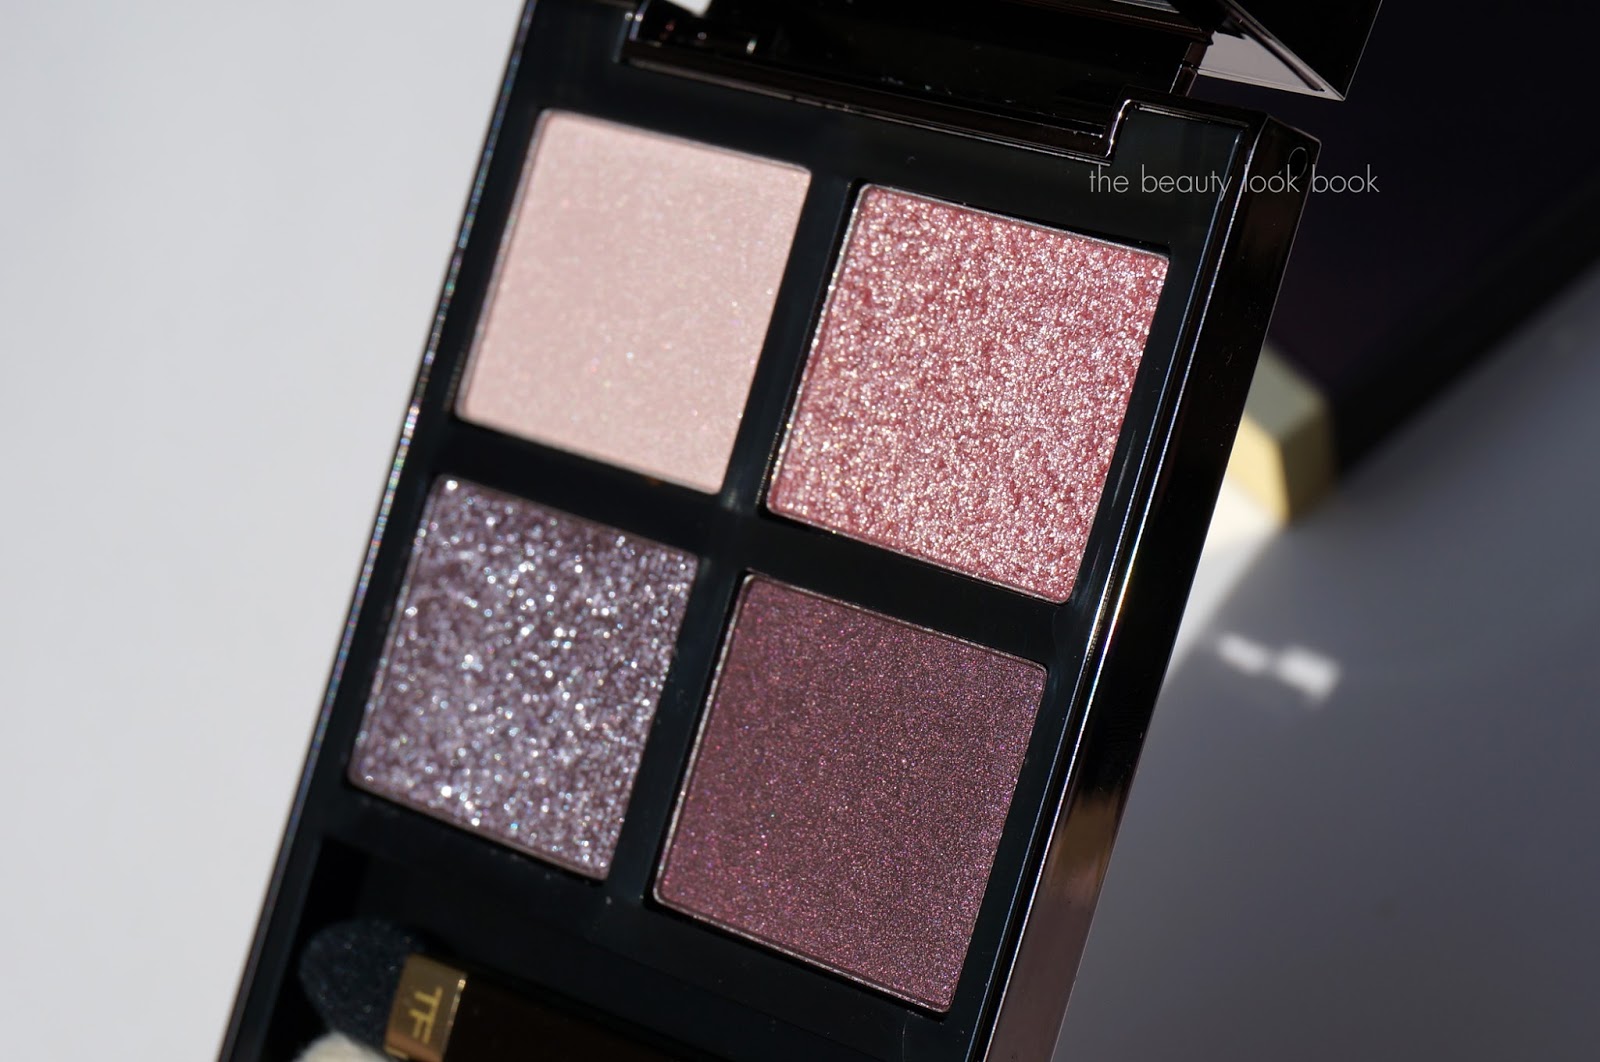 Tom Ford Seductive Rose Eye Color Quad - The Beauty Look Book